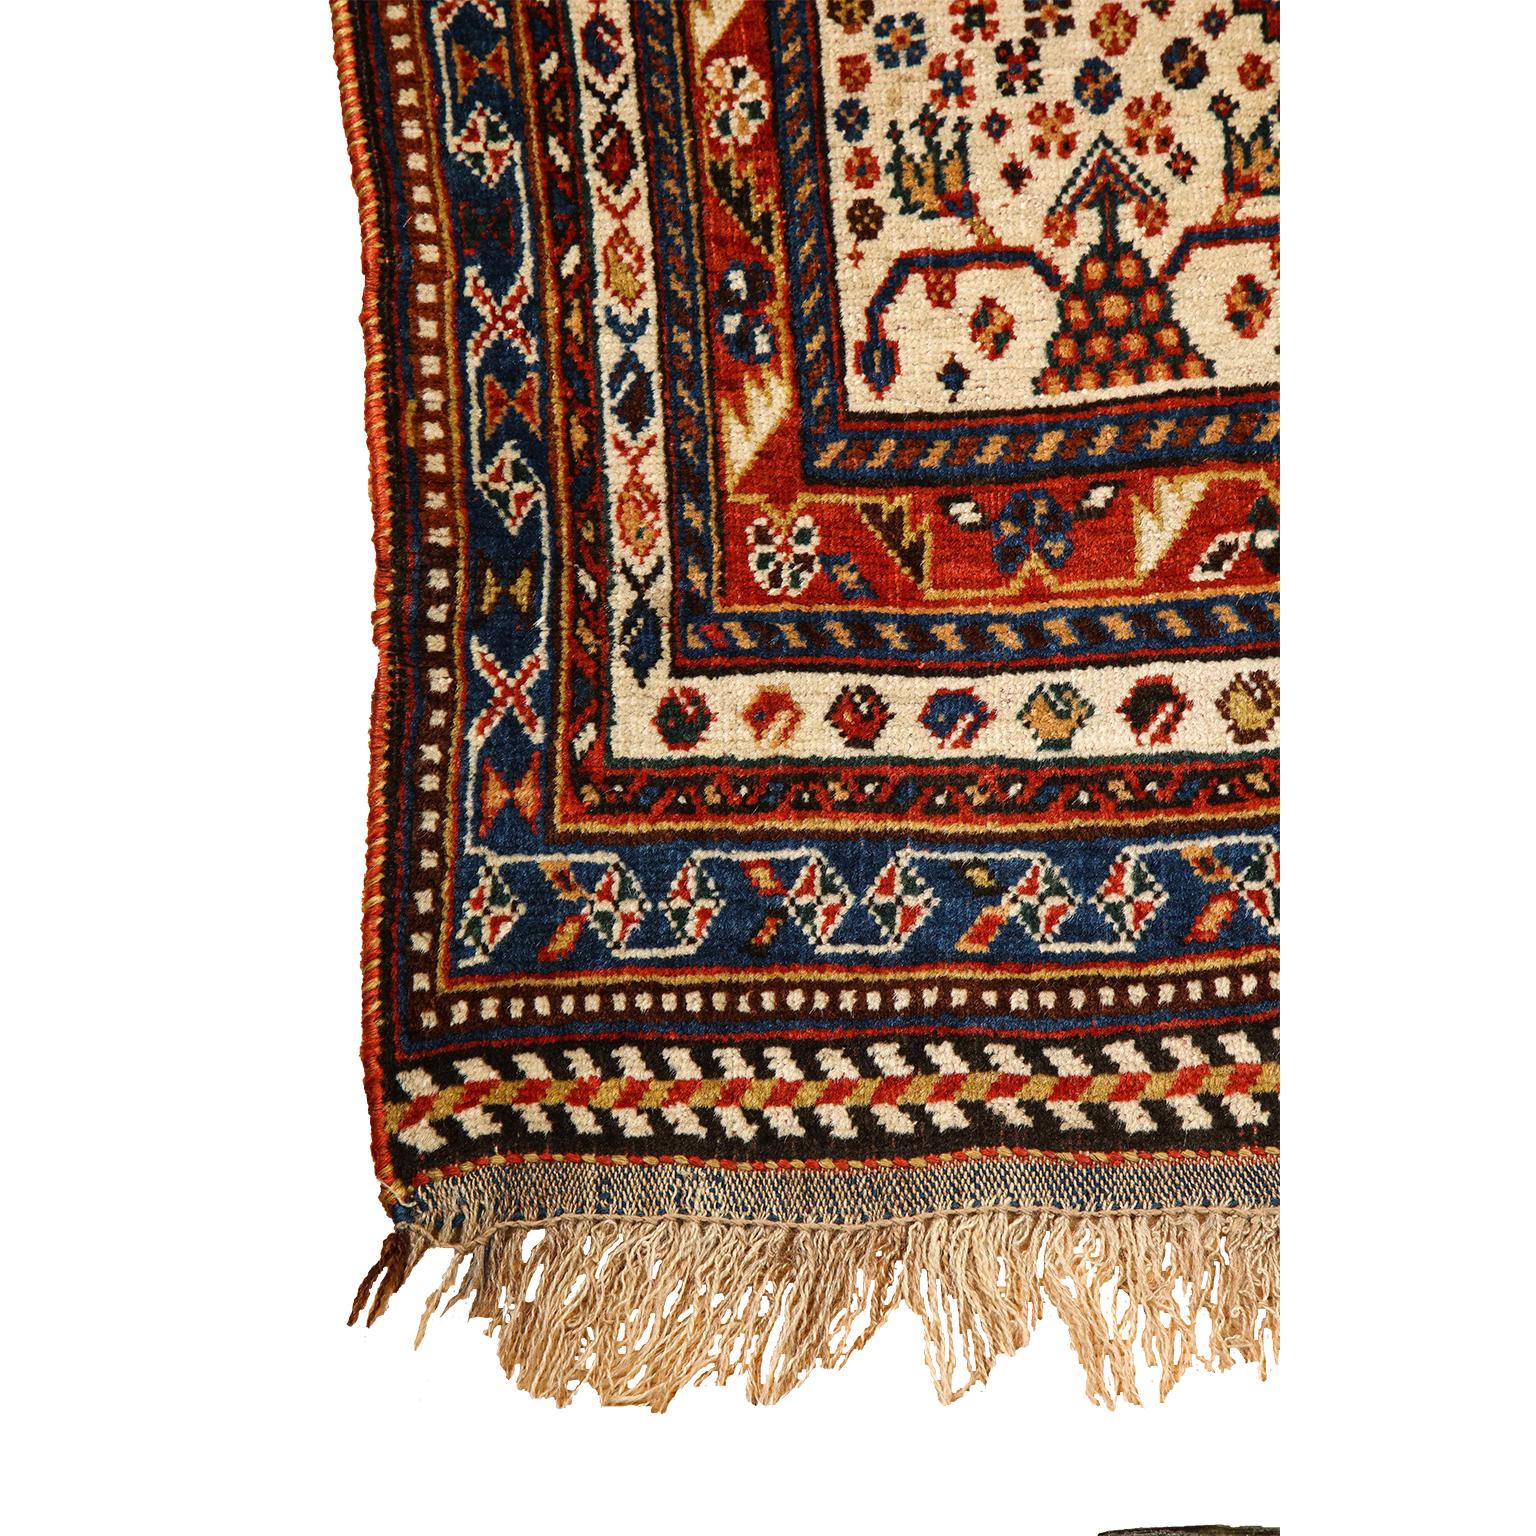 Antique 1900s Wool Persian Kashkouli Rug, 5' x 7' In Good Condition For Sale In New York, NY